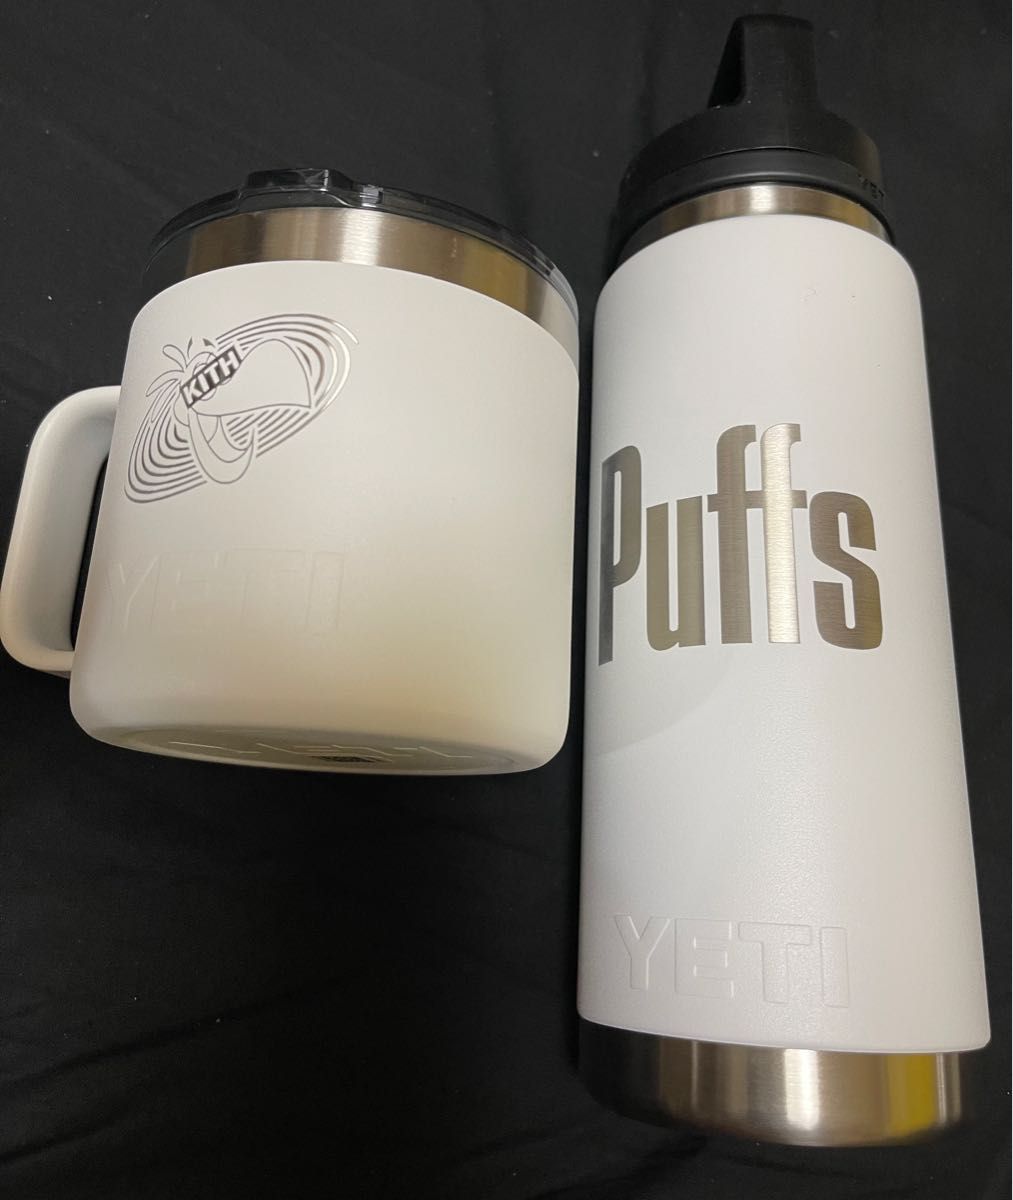 KITH & YETI FOR COCOA PUFFS BOTTLE-